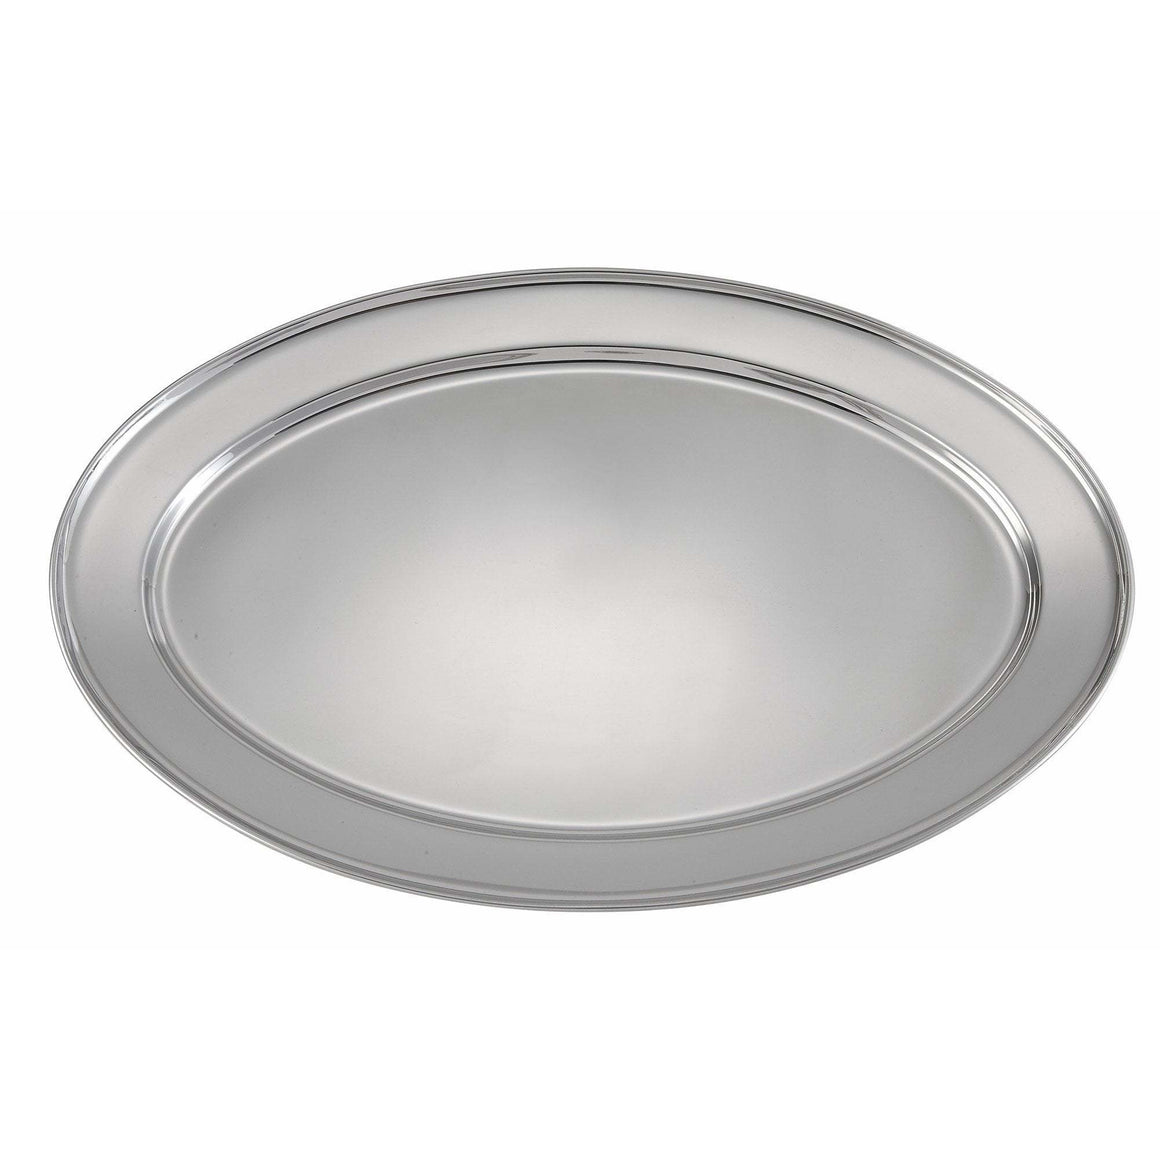 Winco - OPL-18 - Serving Platter, Oval, 18"x 11-1/2", Stainless Steel - Tabletop - Maltese & Co New and Used  restaurant Equipment 